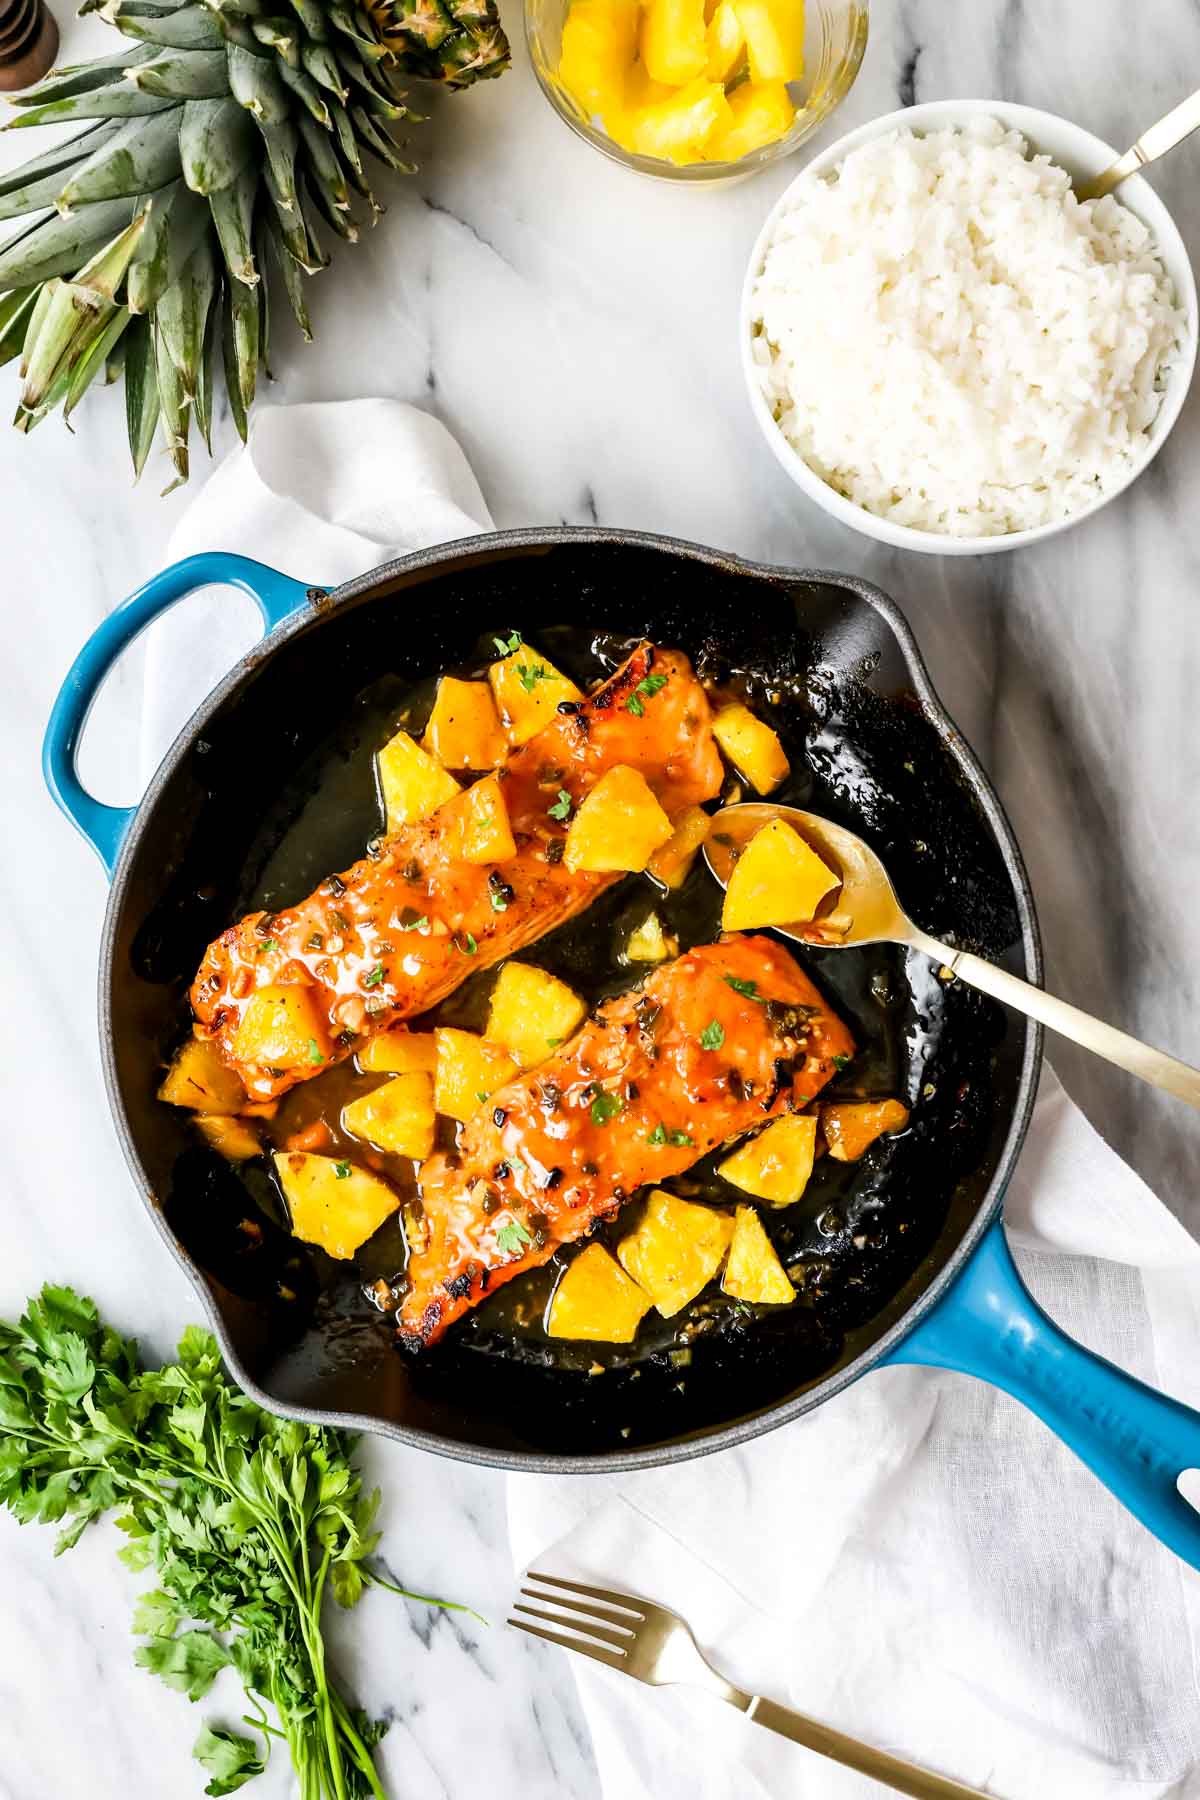 Overhead view of a skillet of glazed salmon topped with pineapple pieces.